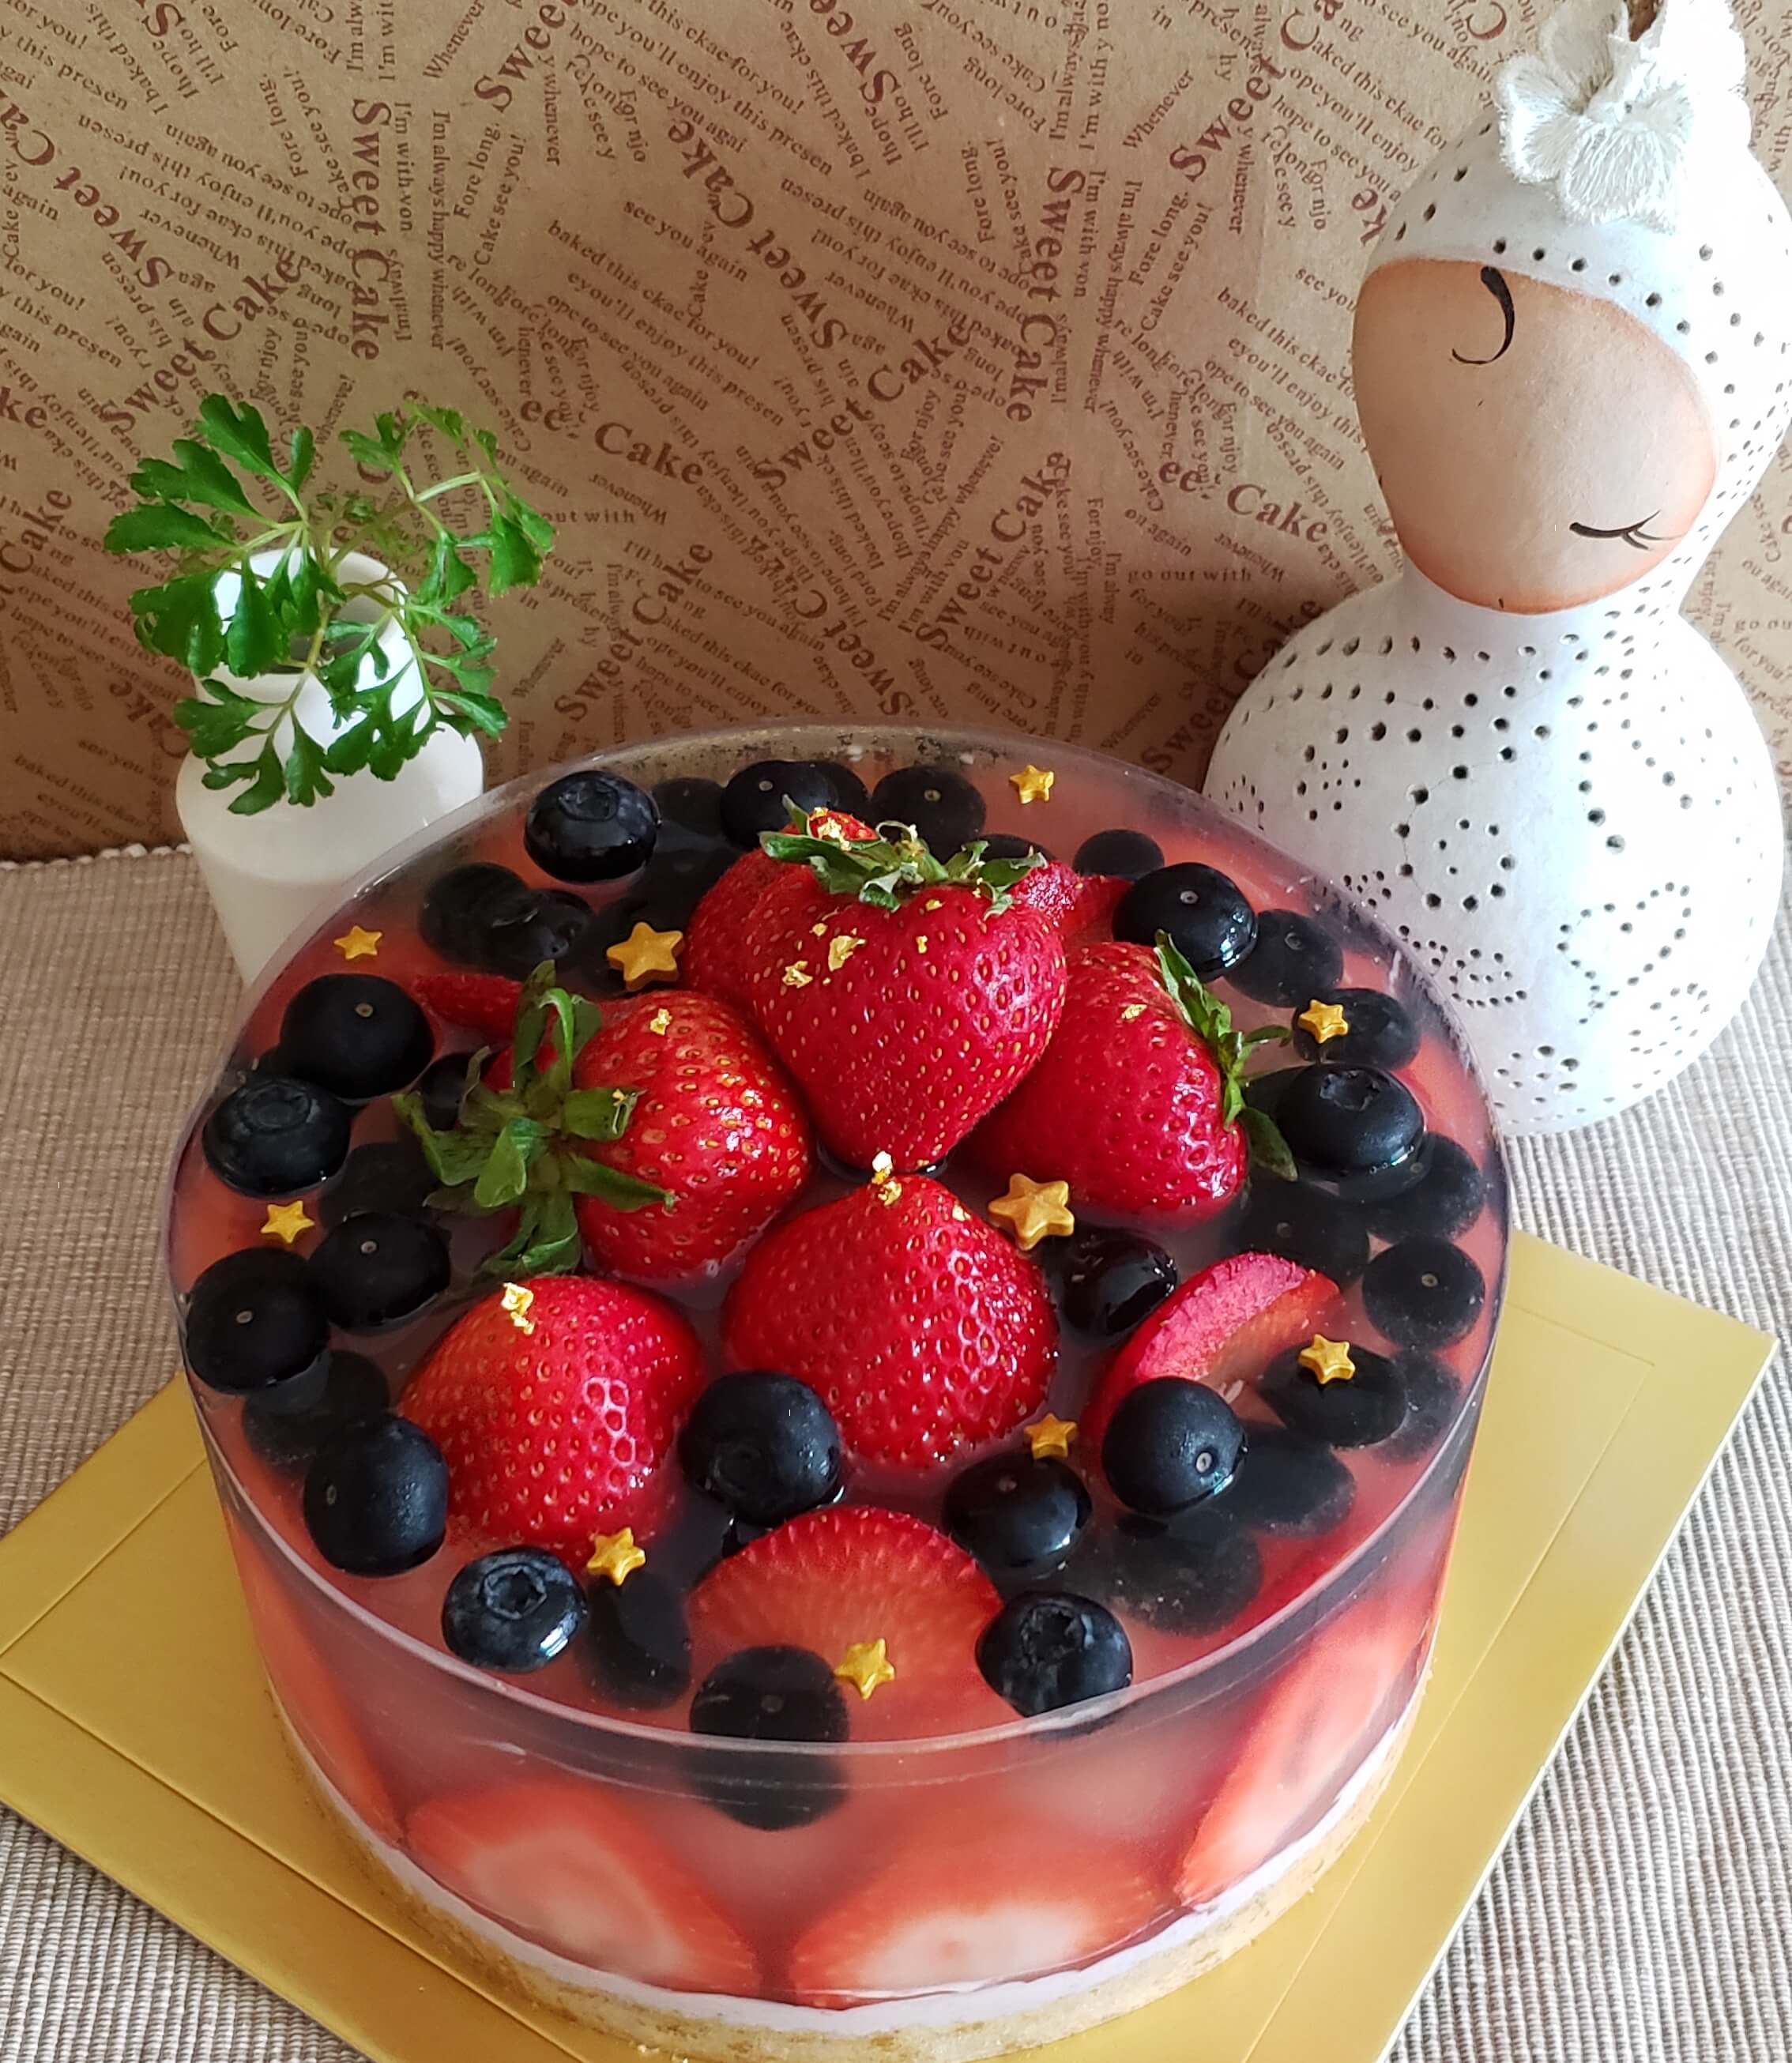 Strawberry Cheese Cake with Berries Jelly士多啤梨忌廉芝士蛋糕🎂